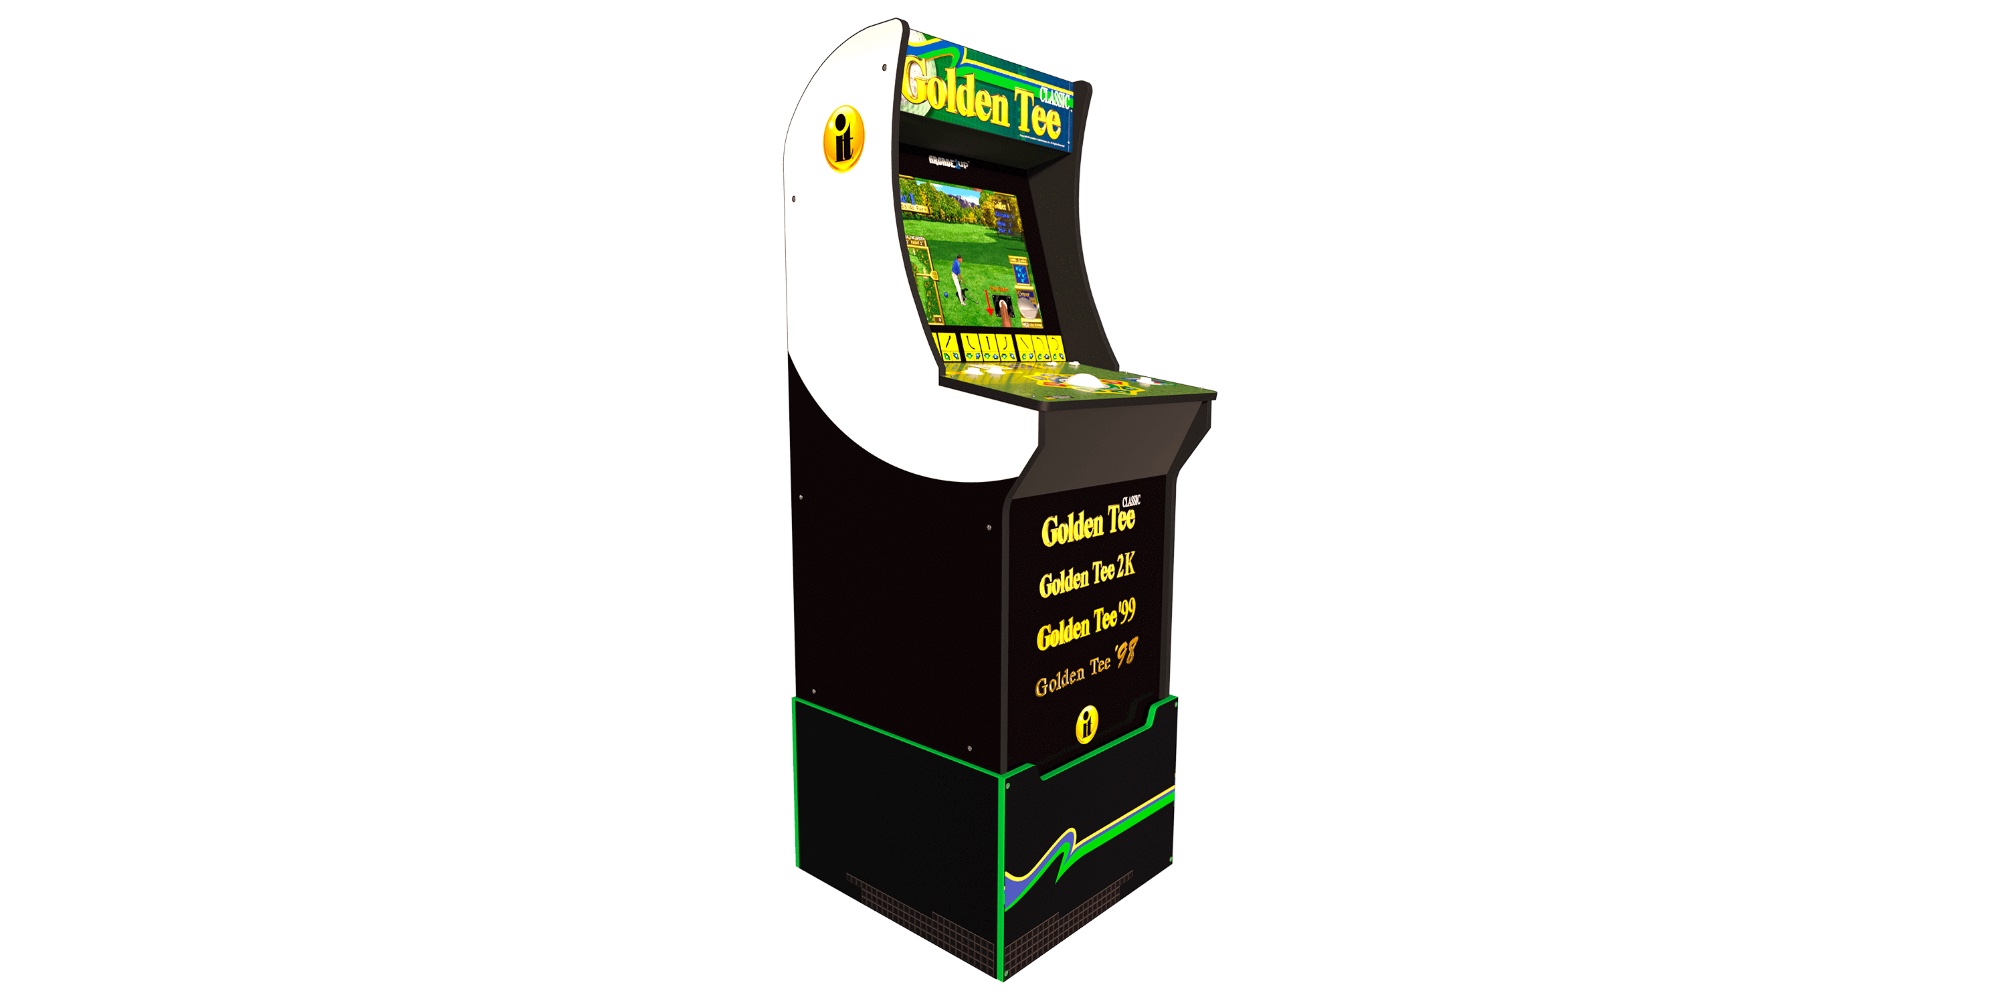 Arcade1Up's Golden Tee with riser falls to new low at 300